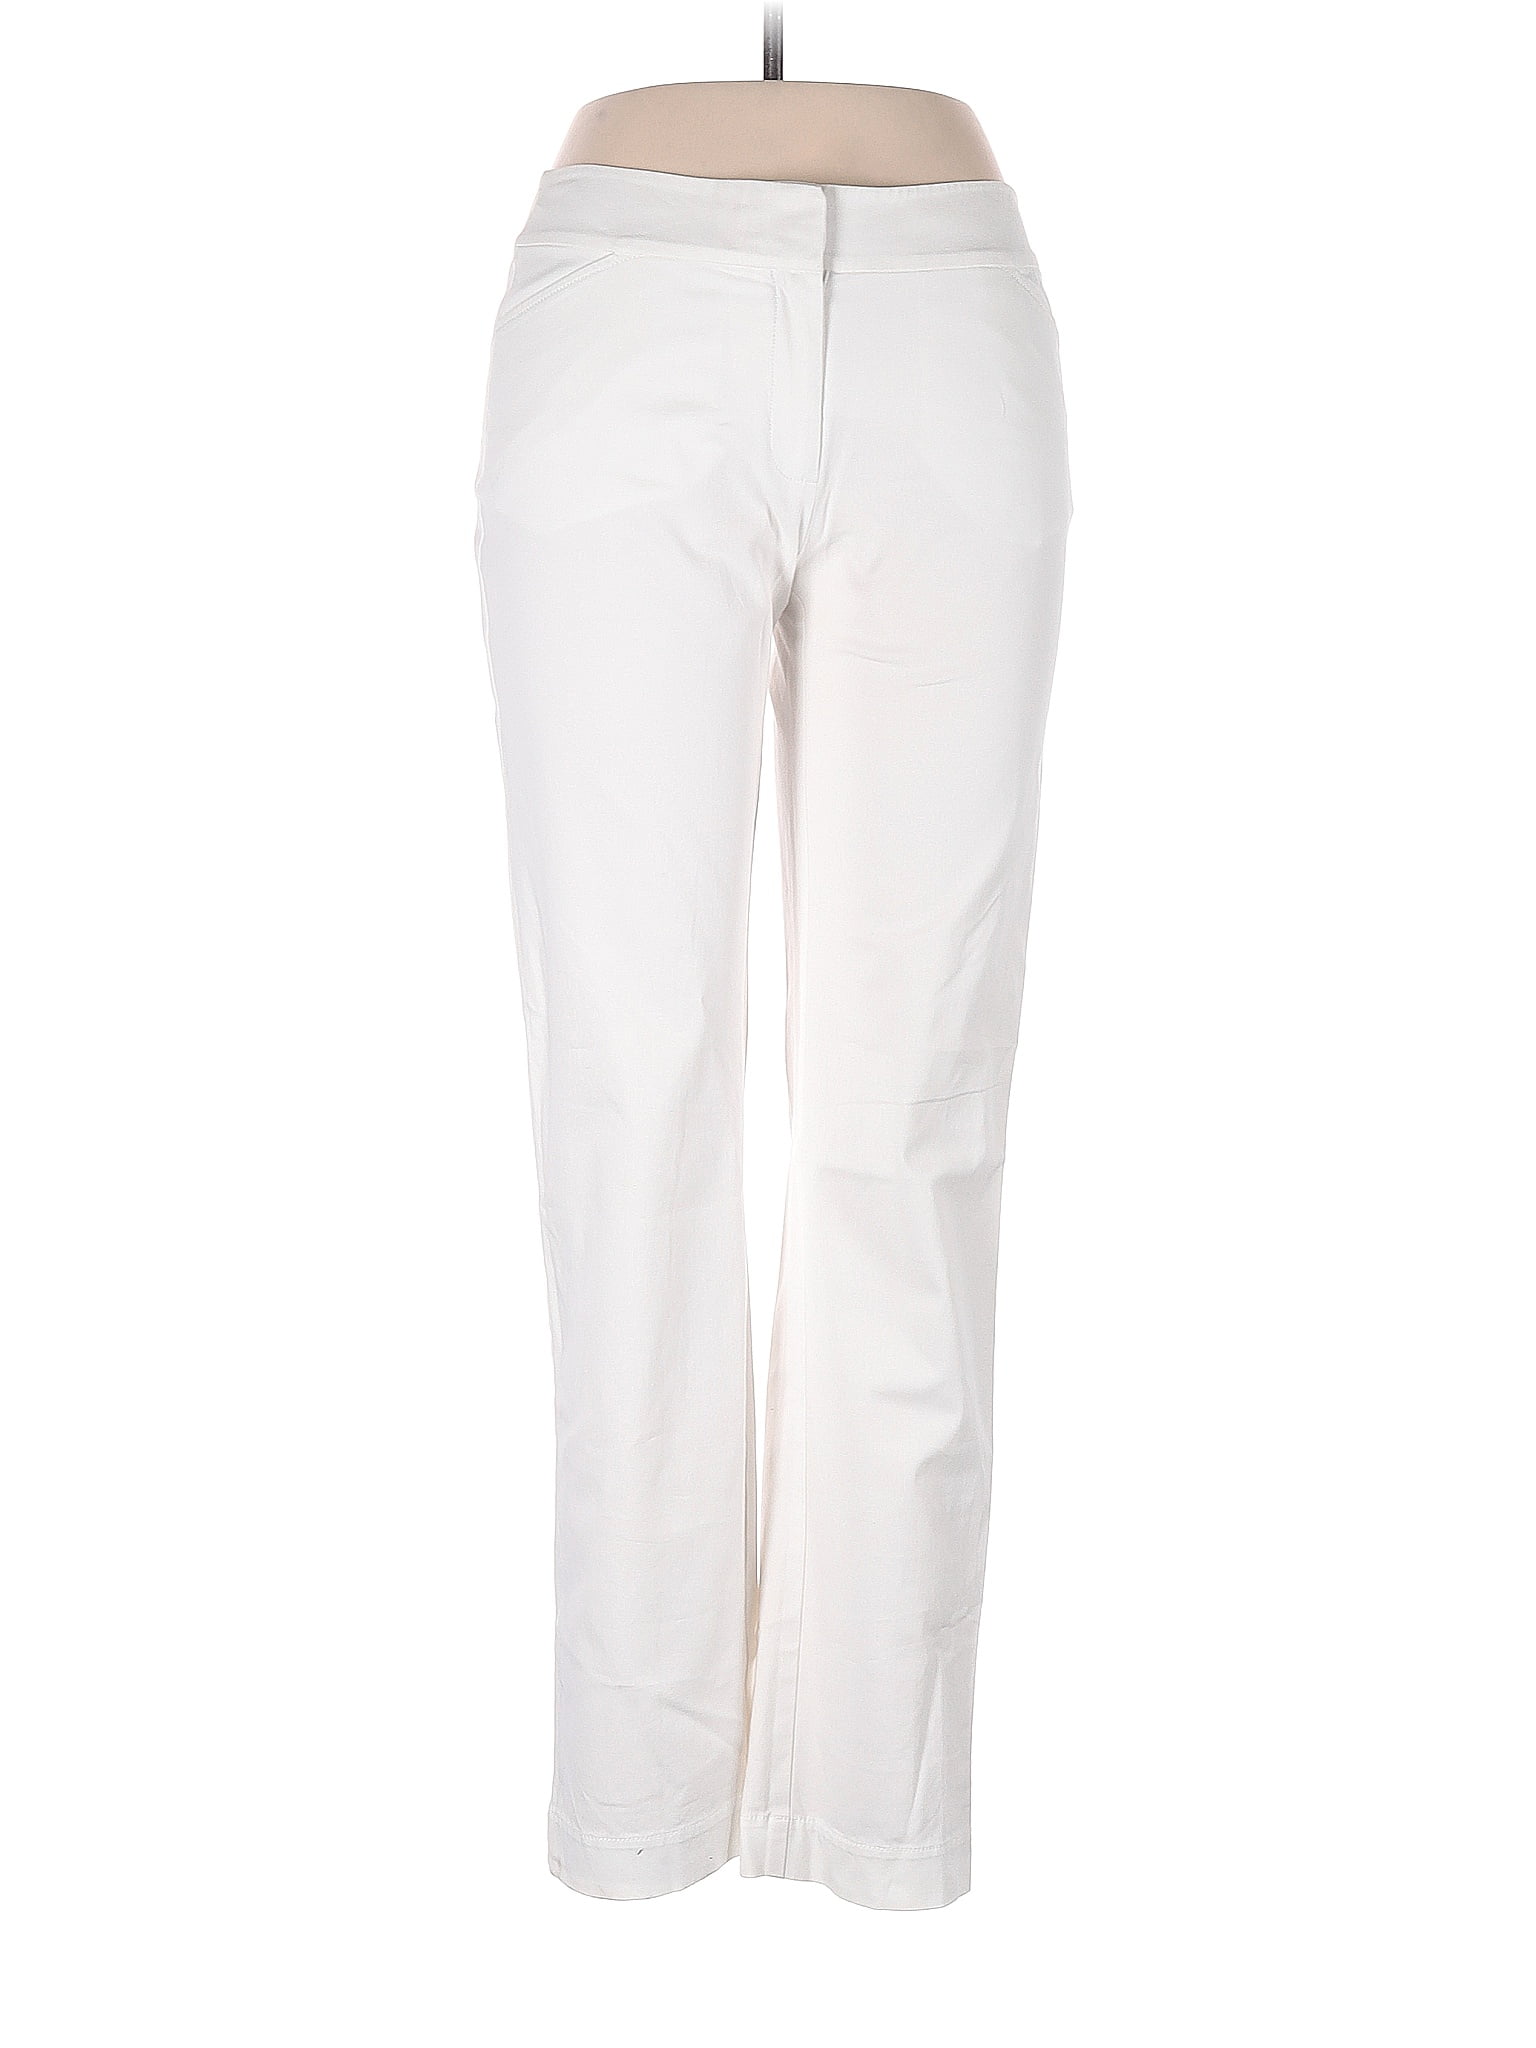 Eileen Fisher Solid White Ivory Casual Pants Size S - 80% off | thredUP